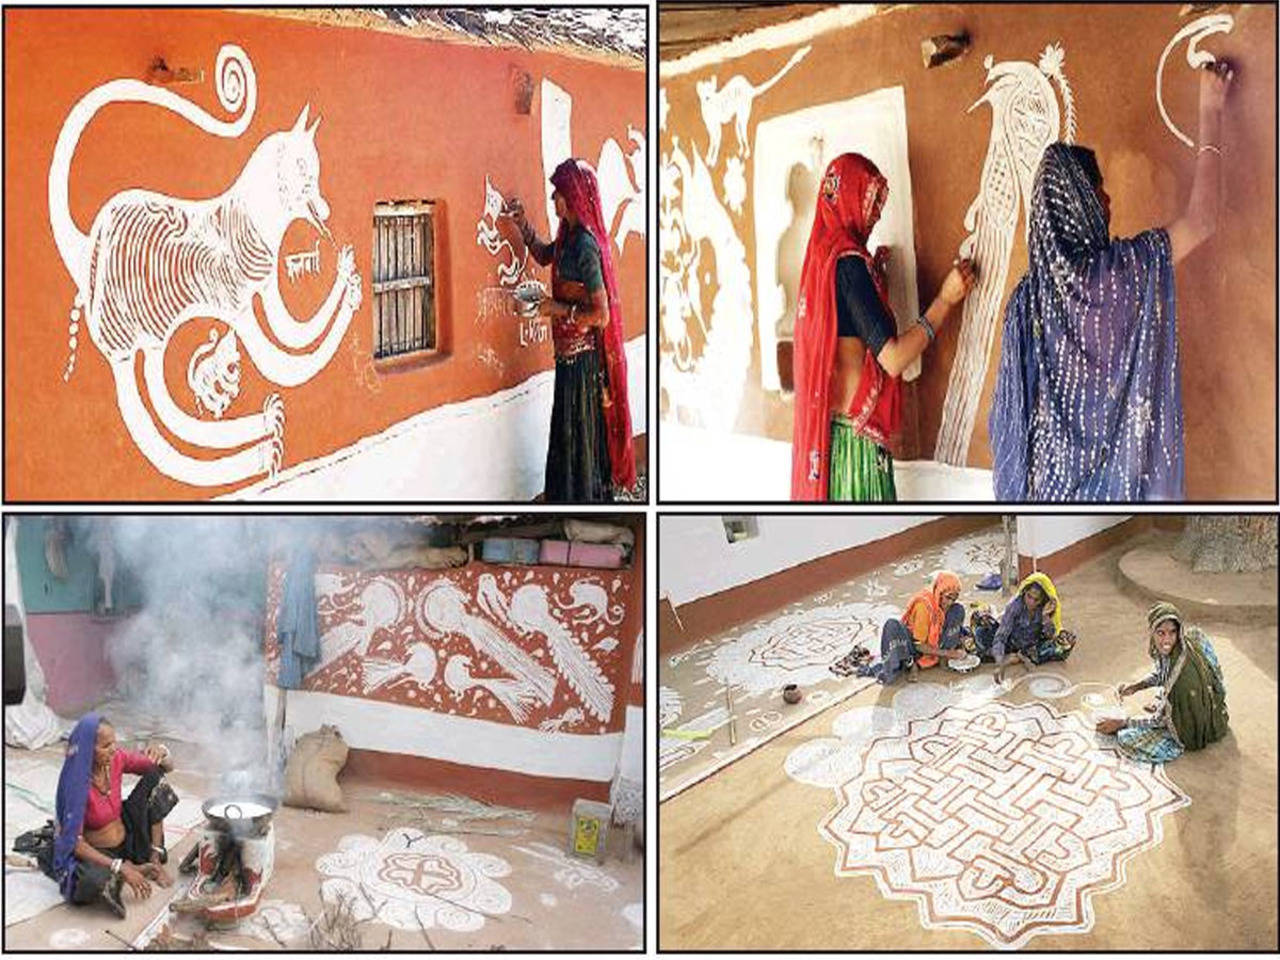 Rajasthan: Art of mud wall painting dying a slow death | Jaipur ...